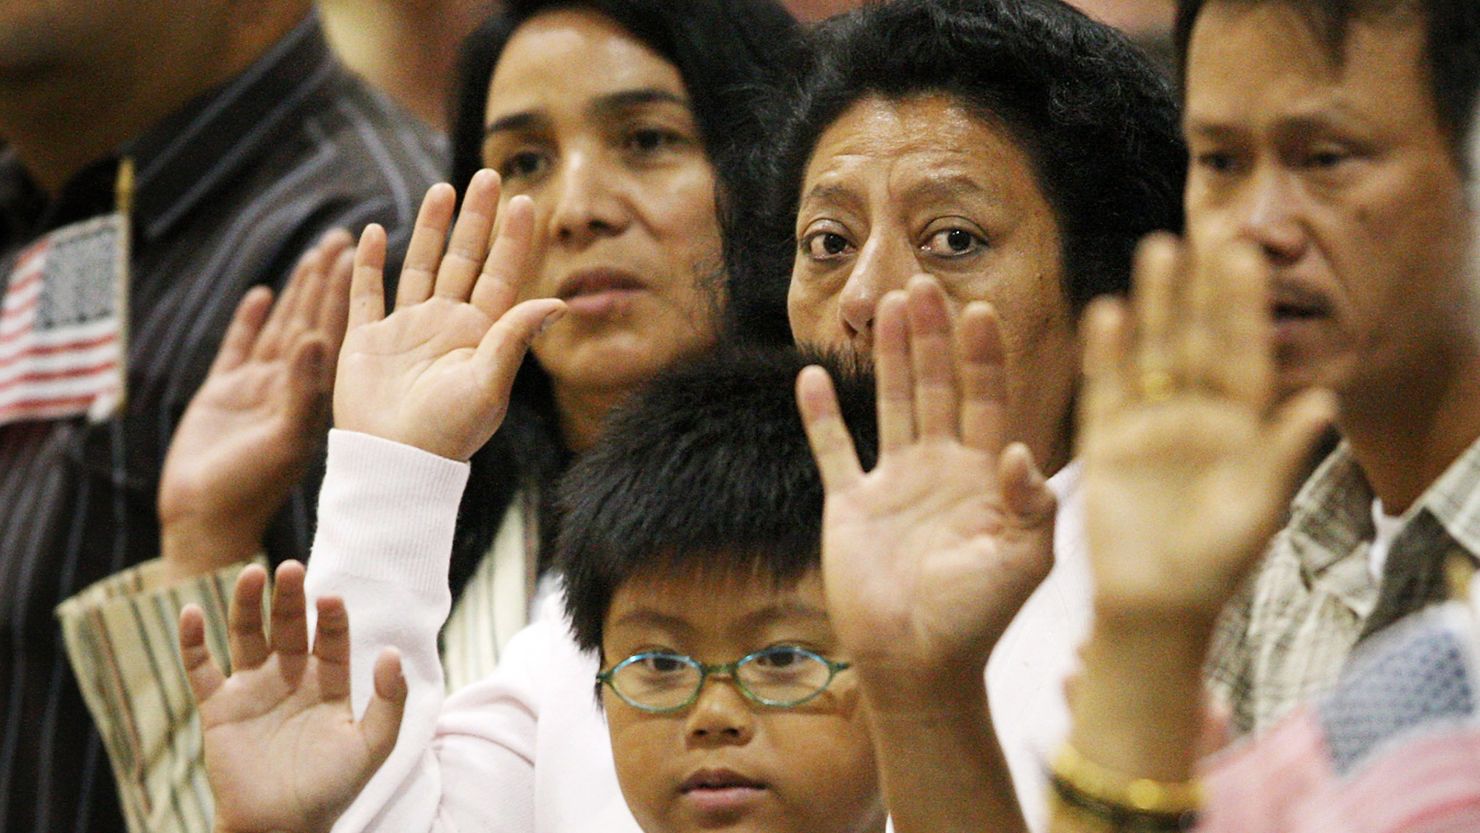 Latinos take the oath of citizenship during naturalization ceremonies at the Los Angeles Convention Center in 2008. Their numbers growing, Latino voters have growing influence in U.S. elections.